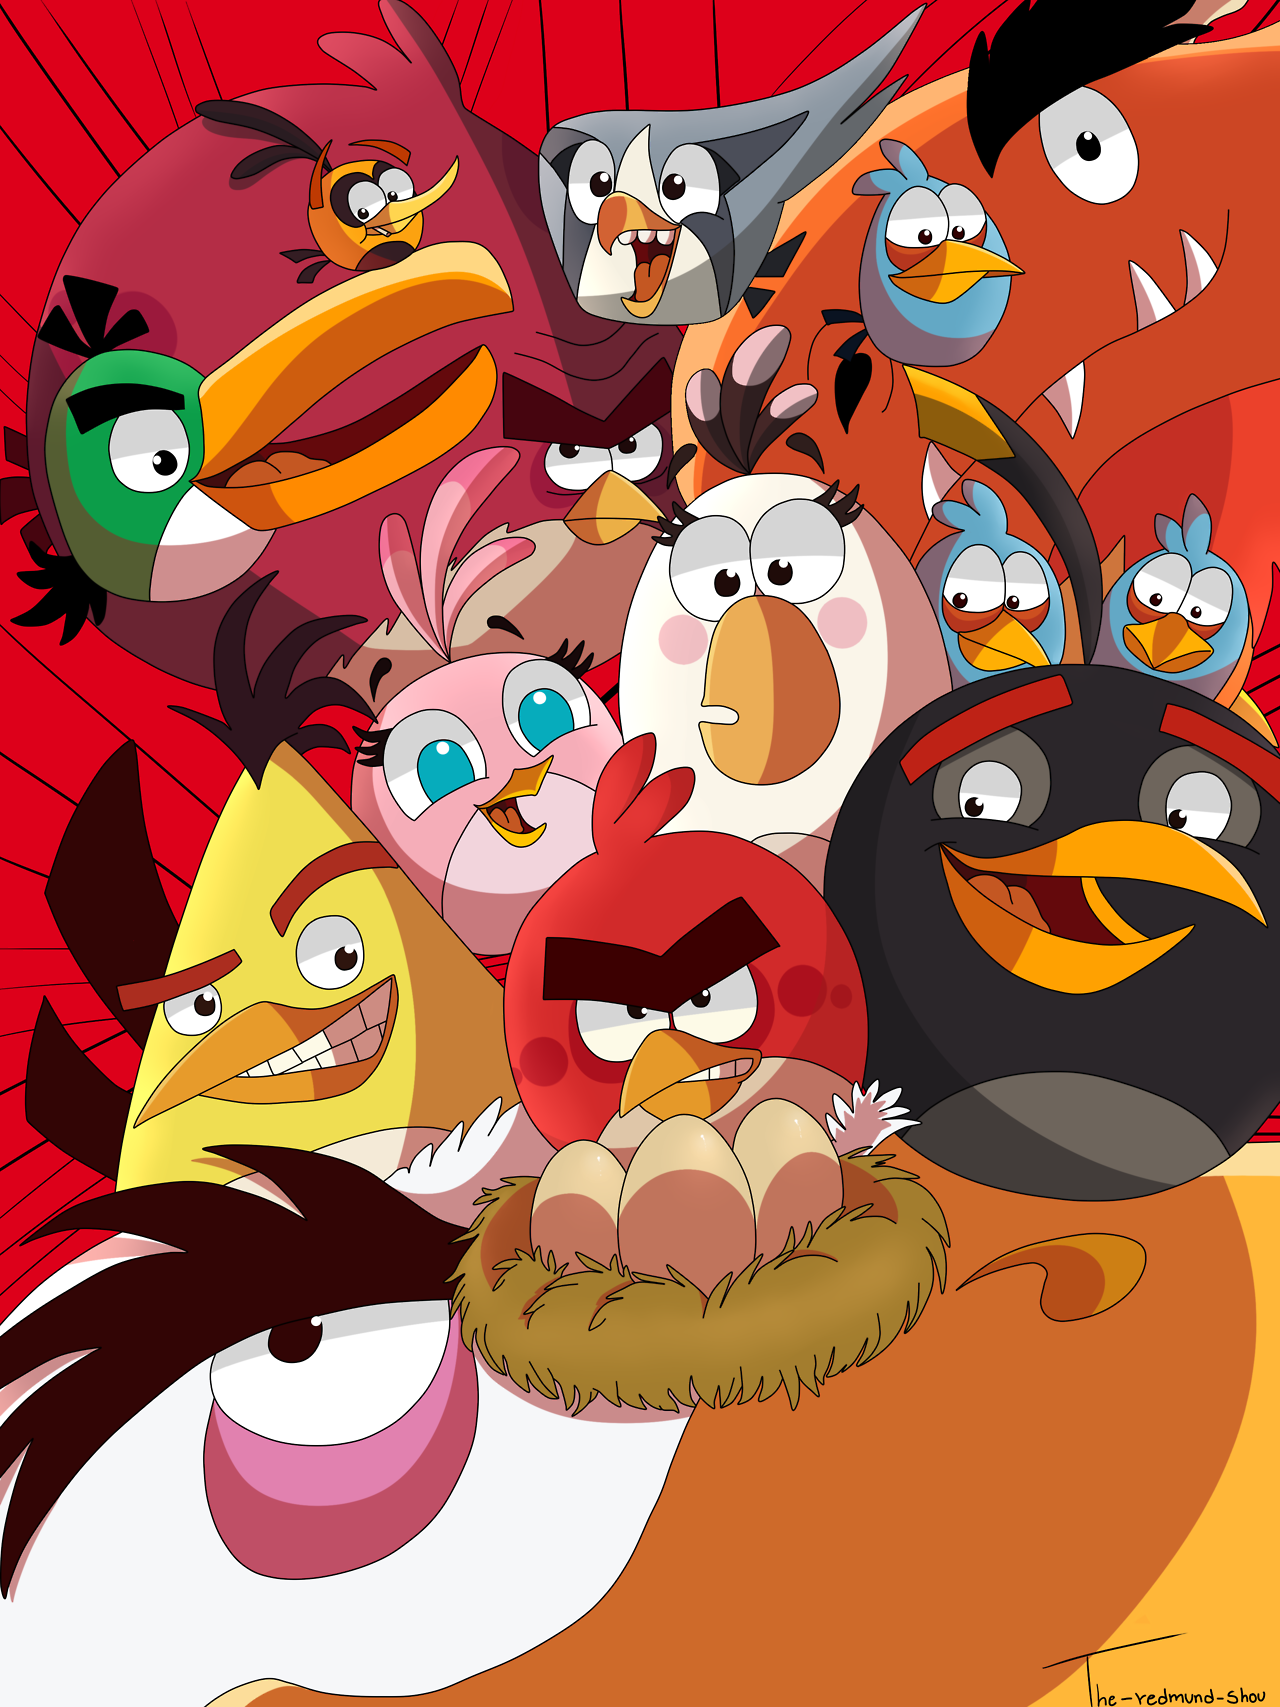 the-redmund-shou: “Angry Birds is the only Fandom I will love for the rest of my life and I do not care if I’m the only one who likes it, while I’m happy I’ll always do it :,3 ”